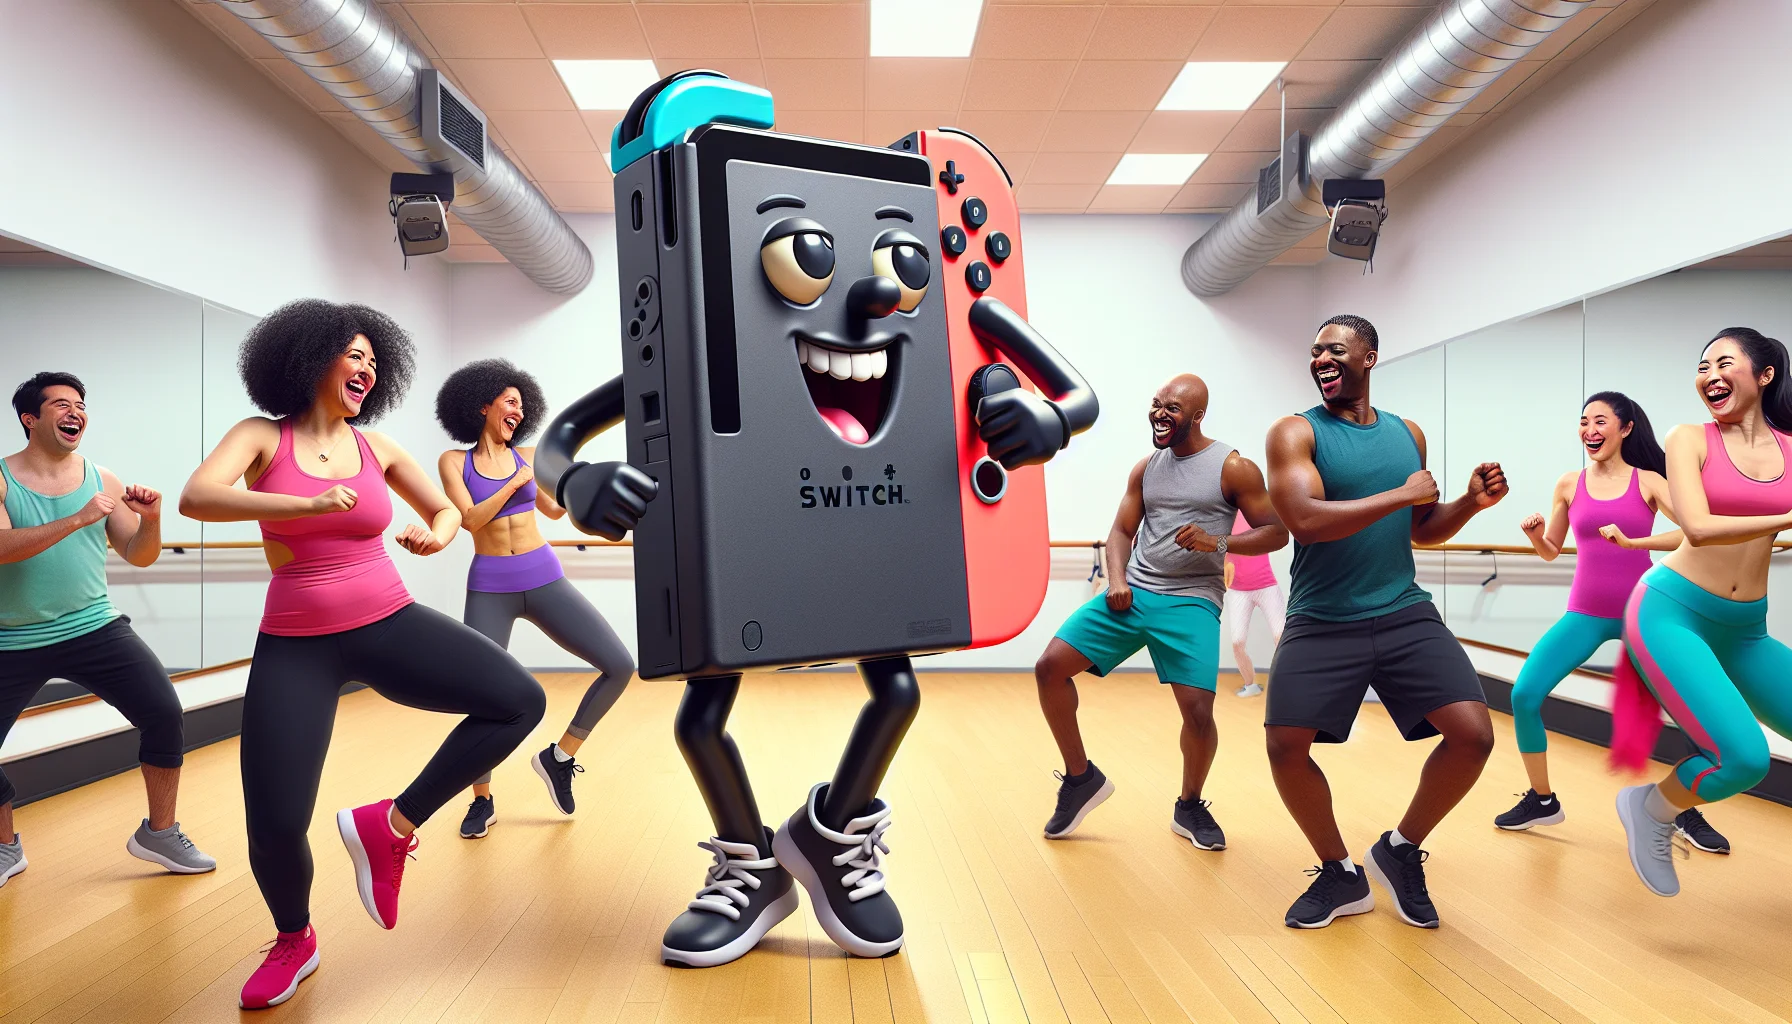 Visualize a humorous scene where an oversized, cartoonish Nintendo Switch is acting as a Zumba instructor. The console itself has an anthropomorphized face and is energetically demonstrating various Zumba dance moves, legs and arms moving rhythmically to an implied beat. There are a group of different people comprising of a South Asian woman, Black man, White male and a Middle Eastern female, all laughing and trying to keep up with the routine. The background is a vibrant fitness studio, with large mirrors and bright colored mats.